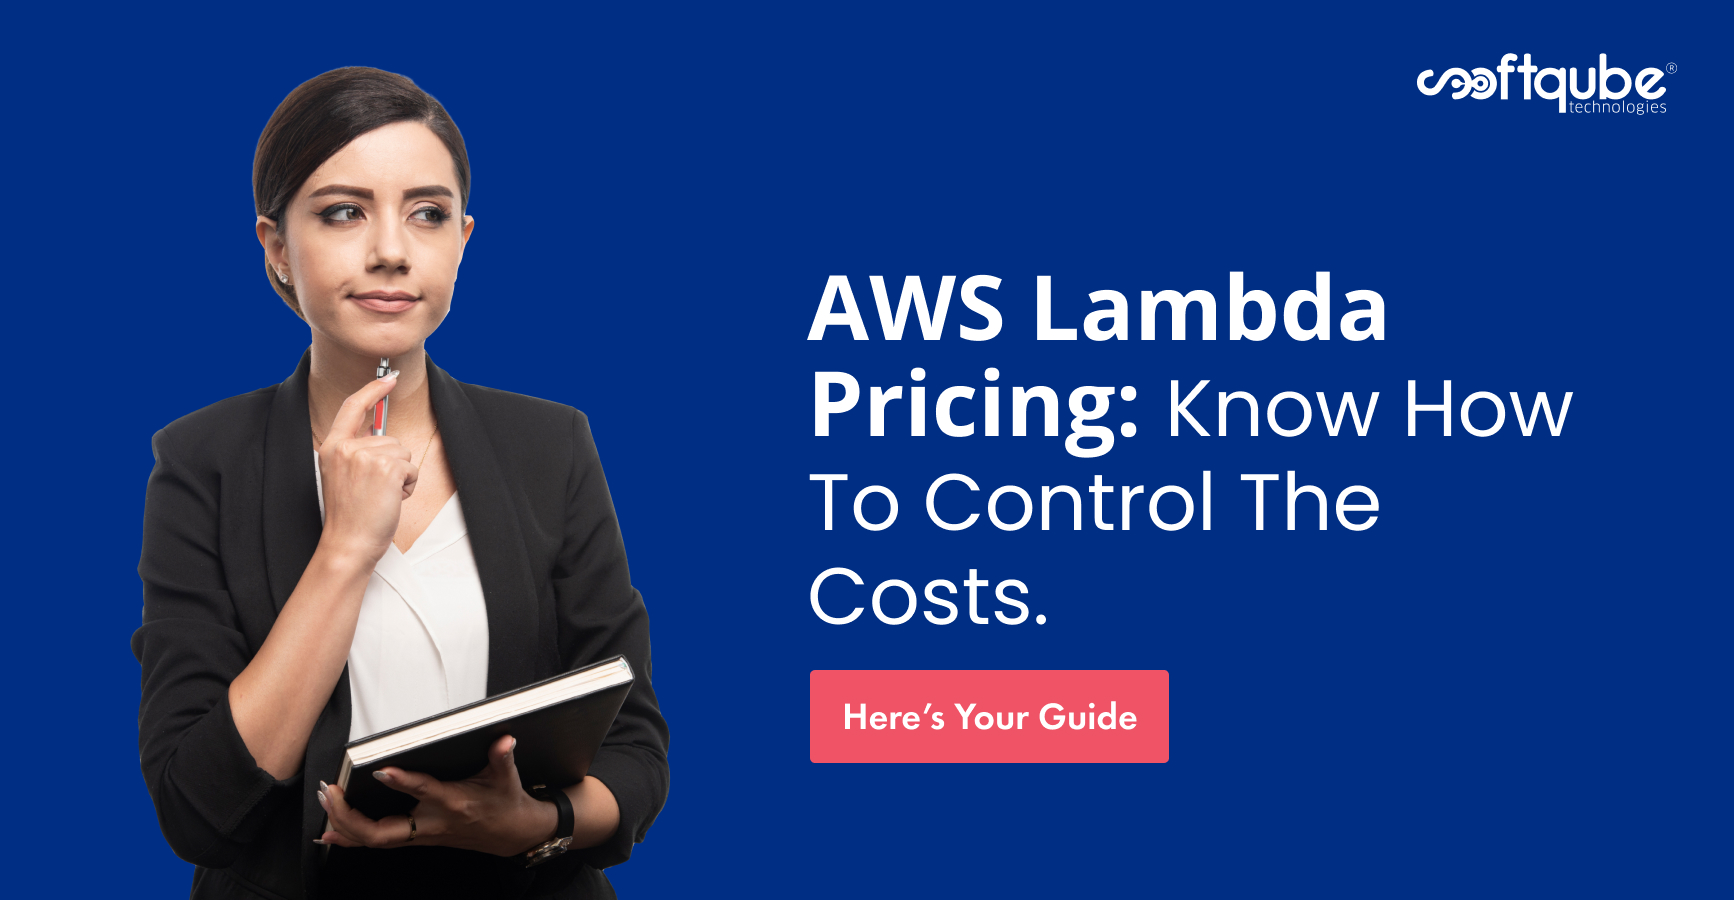 AWS Lambda Pricing: Know How To Control The Costs.